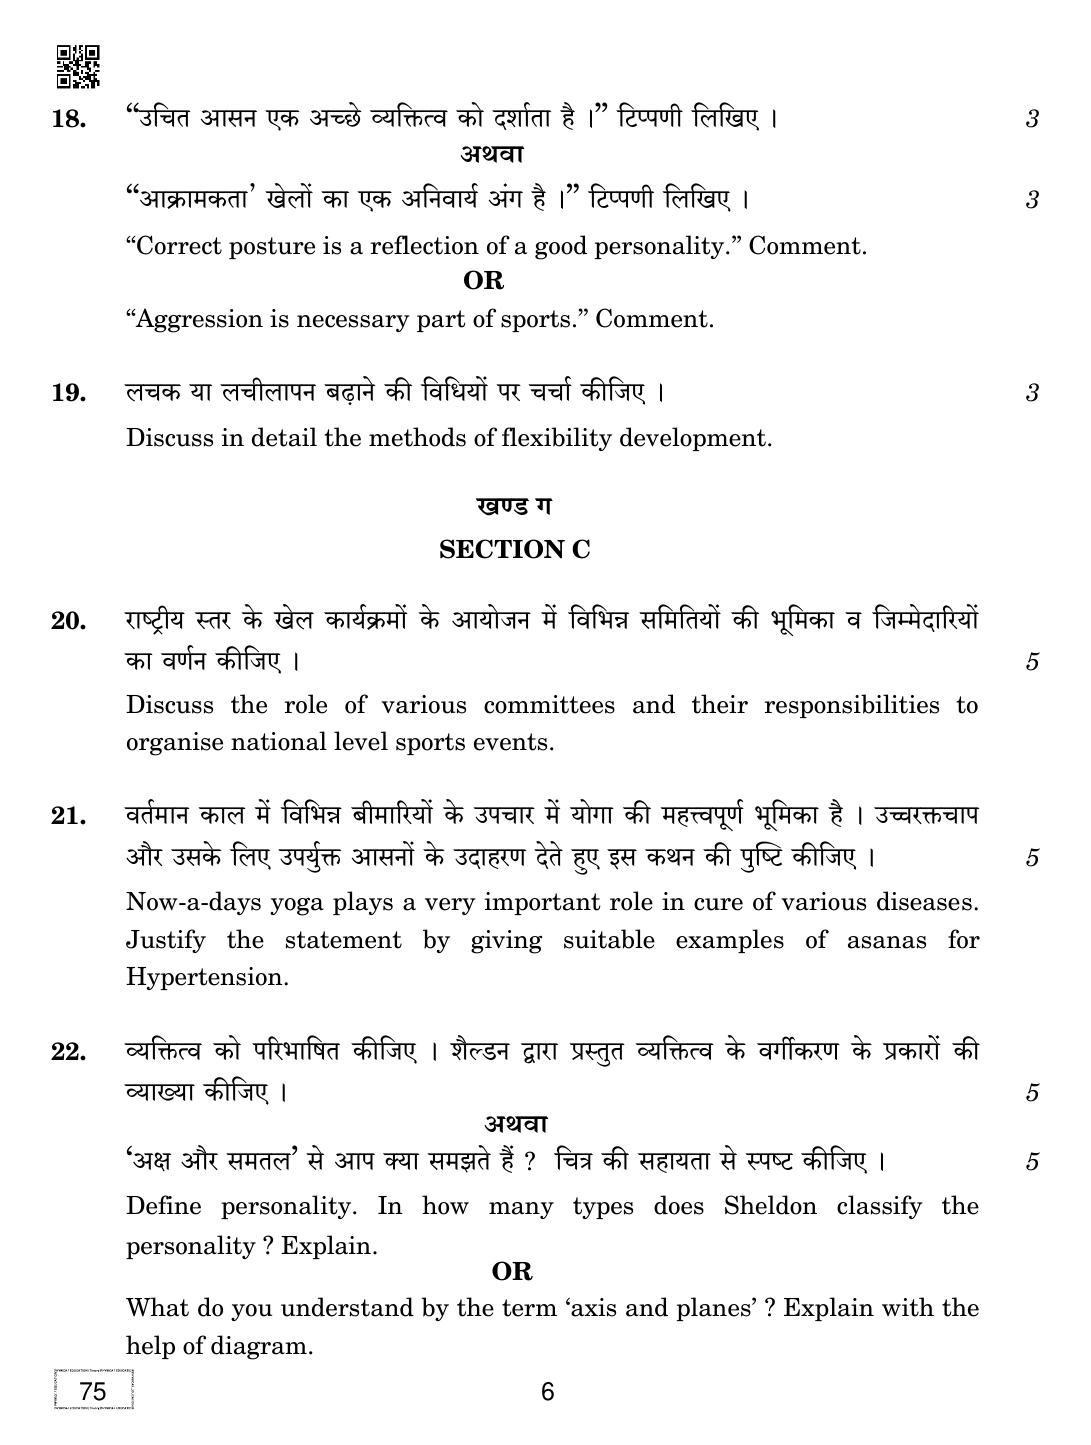 CBSE Class 12 75 PHYSICAL EDUCATION 2019 Compartment Question Paper - Page 6